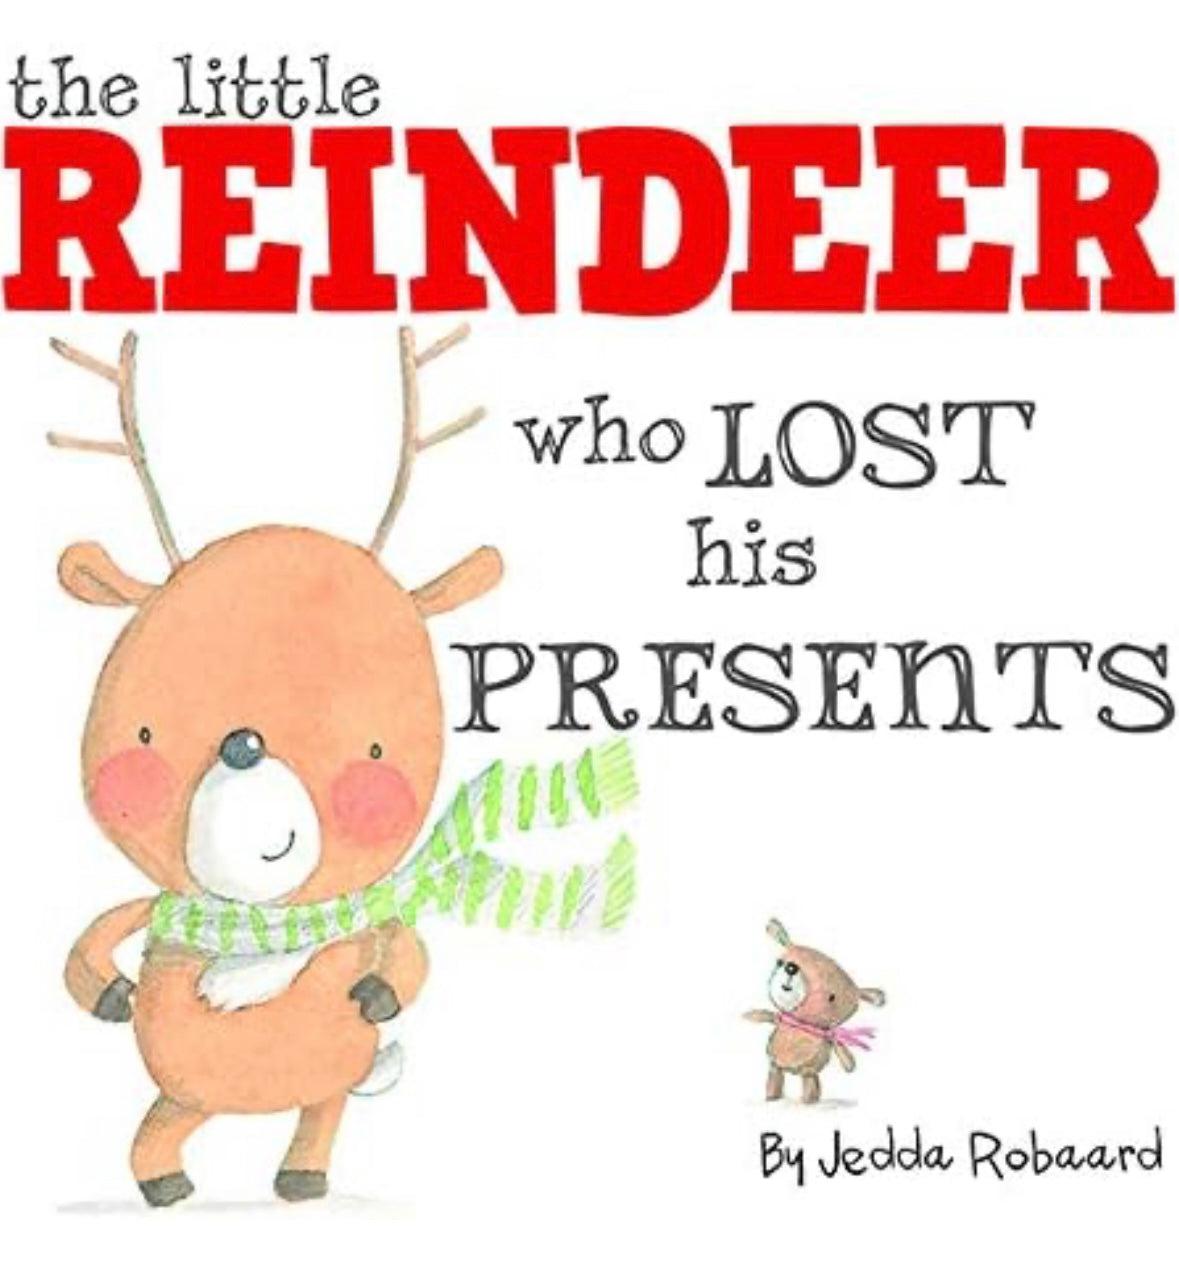 The little reindeer who lost his presents